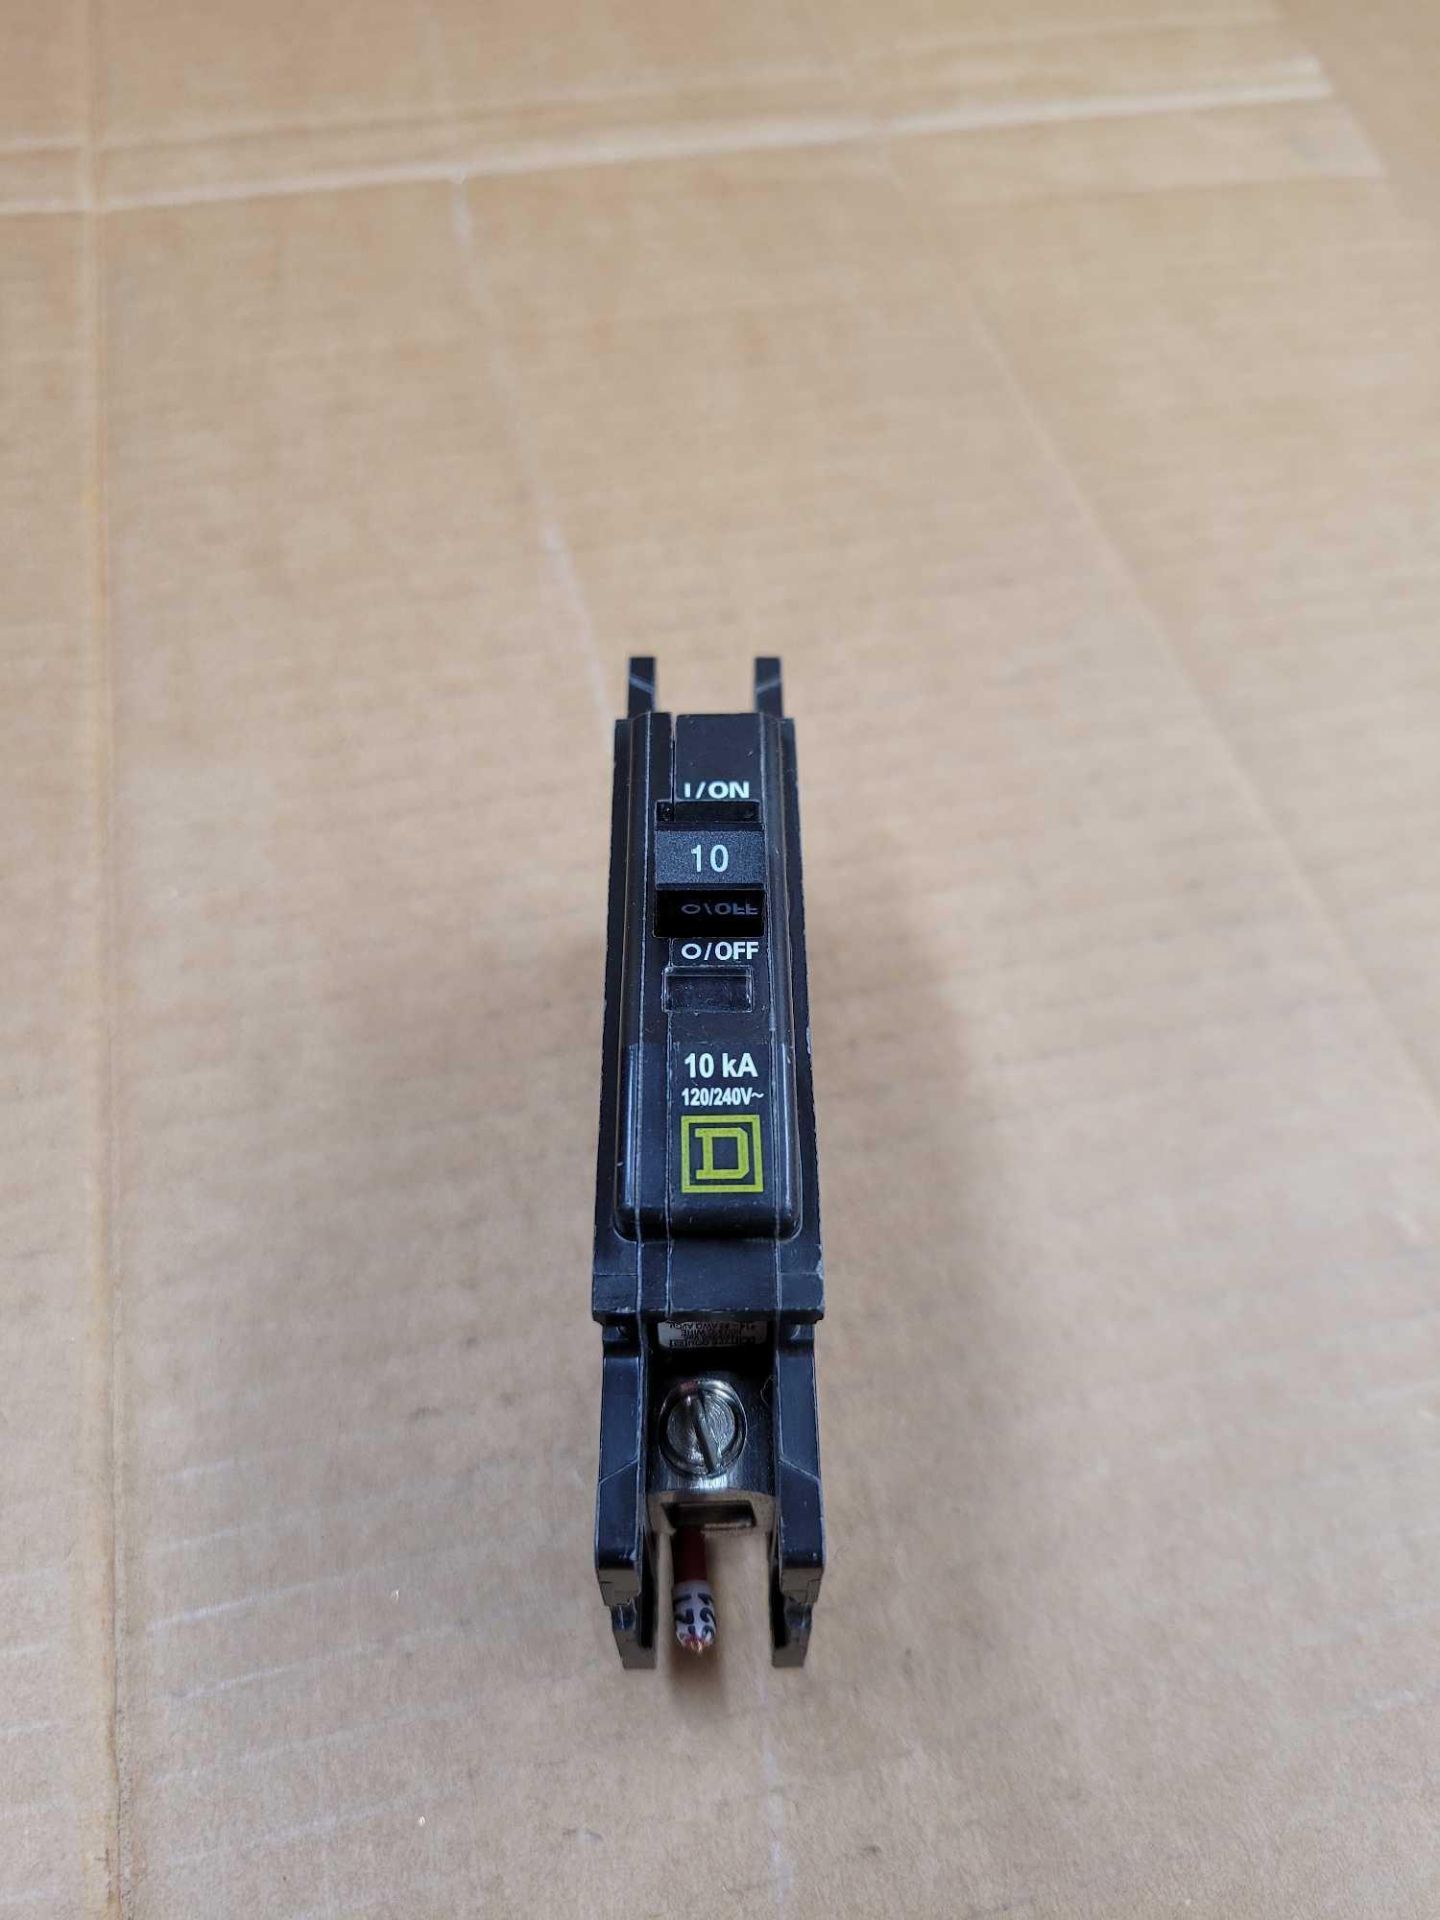 SQUARE D QOU110 / 10 Amp Circuit Breaker  /  Lot Weight: 11.2 lbs - Image 2 of 6